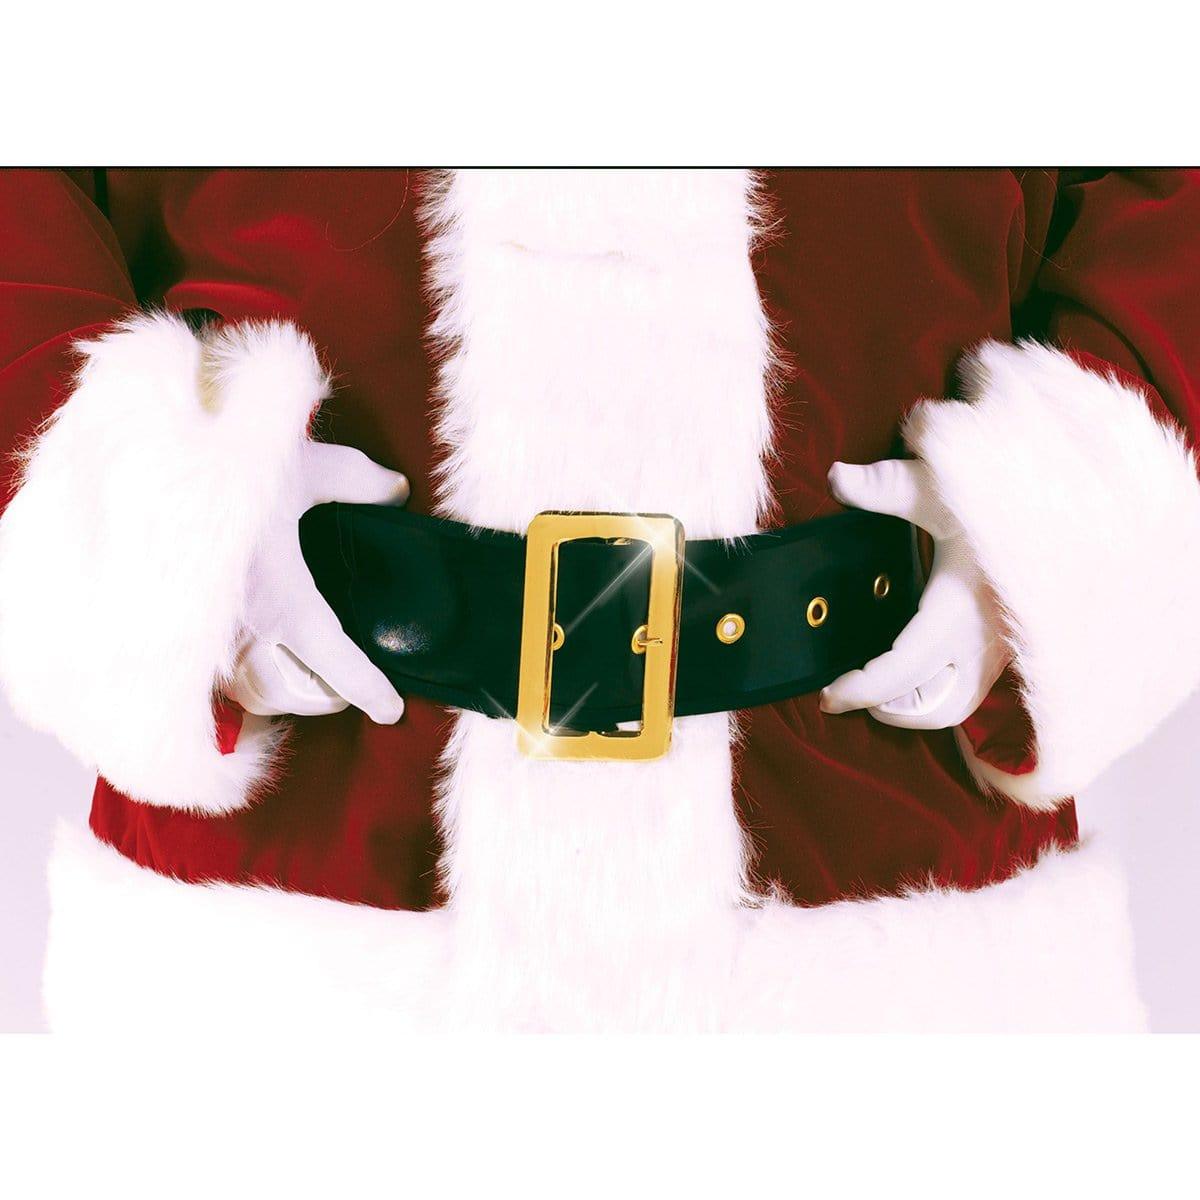 Buy Christmas Deluxe Santa Belt for Adults sold at Party Expert